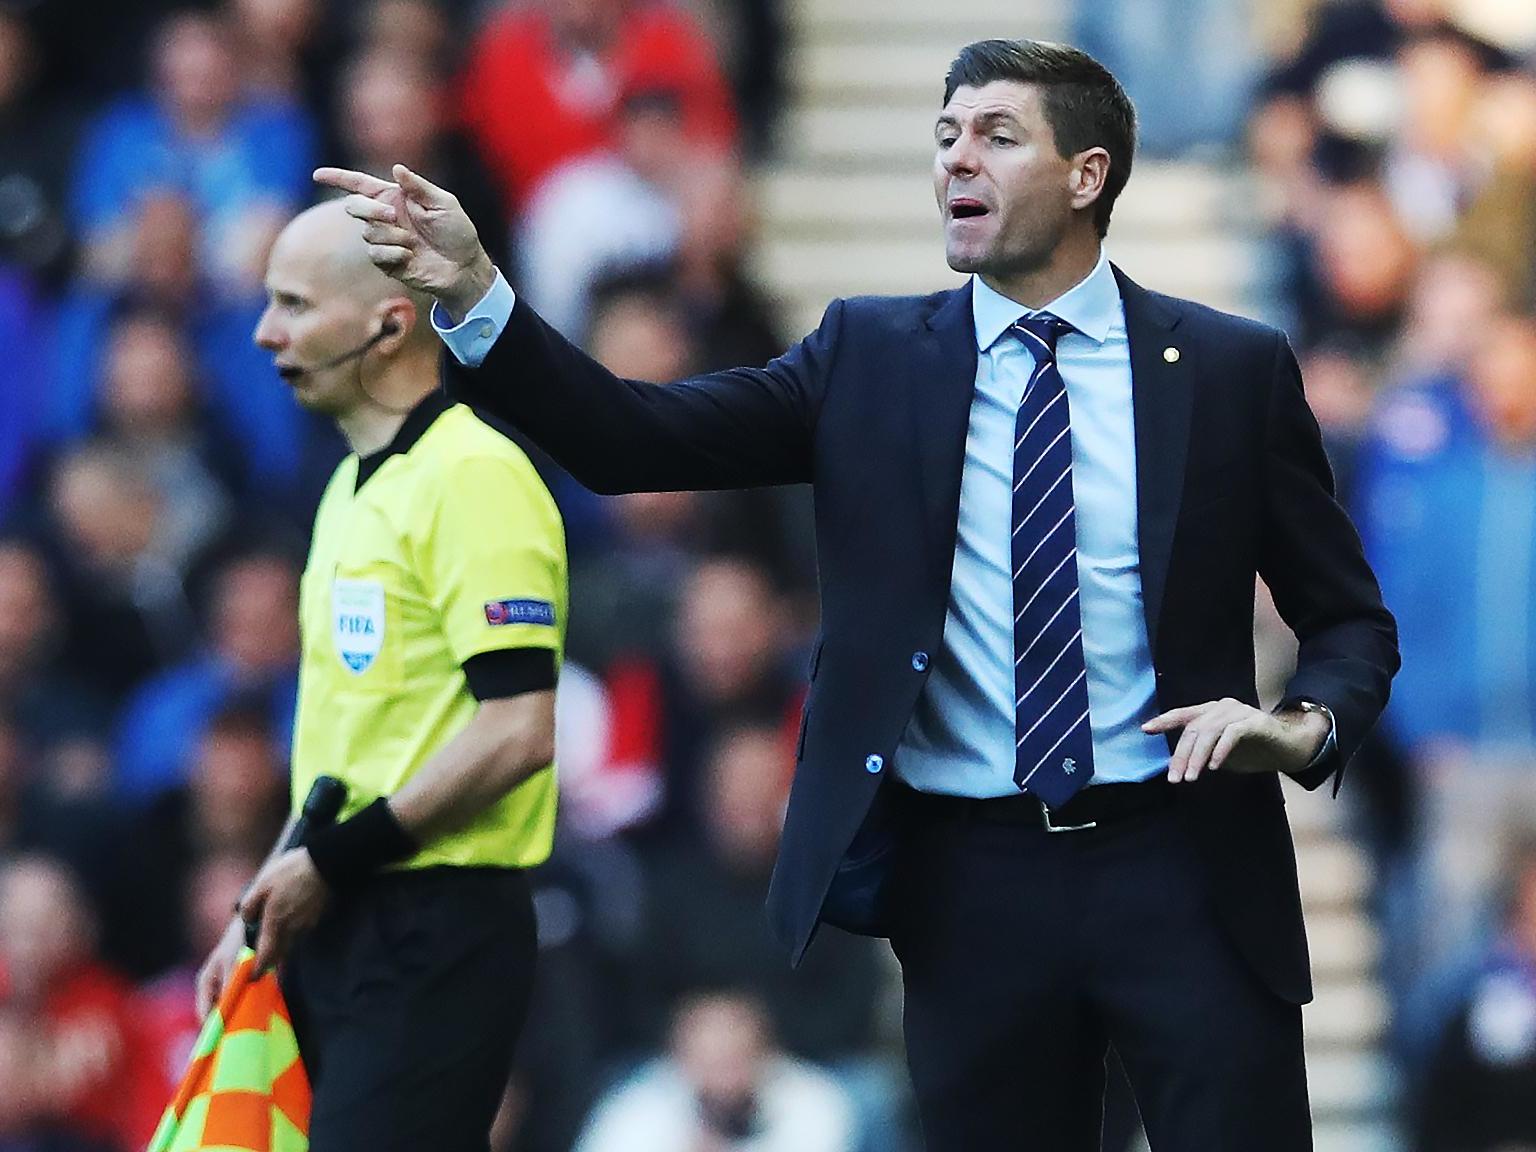 Steven Gerrard directs from the touchline